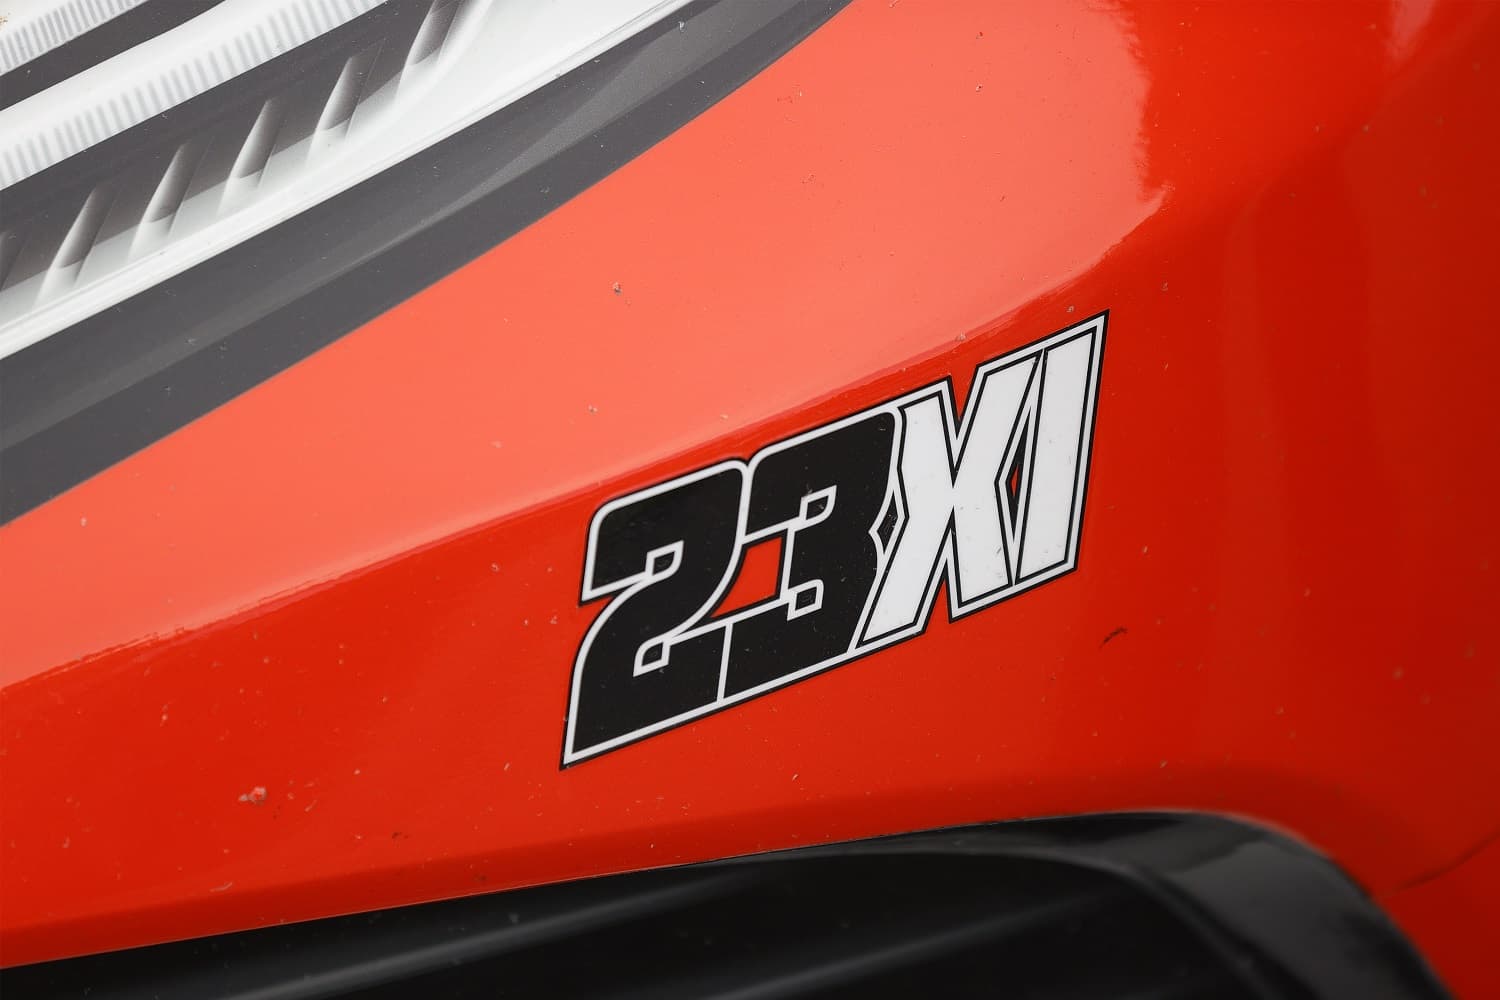 A detail of the 23XI Racing logo on the #23 DoorDash Toyota, driven by Bubba Wallace on the grid prior to the NASCAR Cup Series Daytona 500 on Feb. 14, 2021.